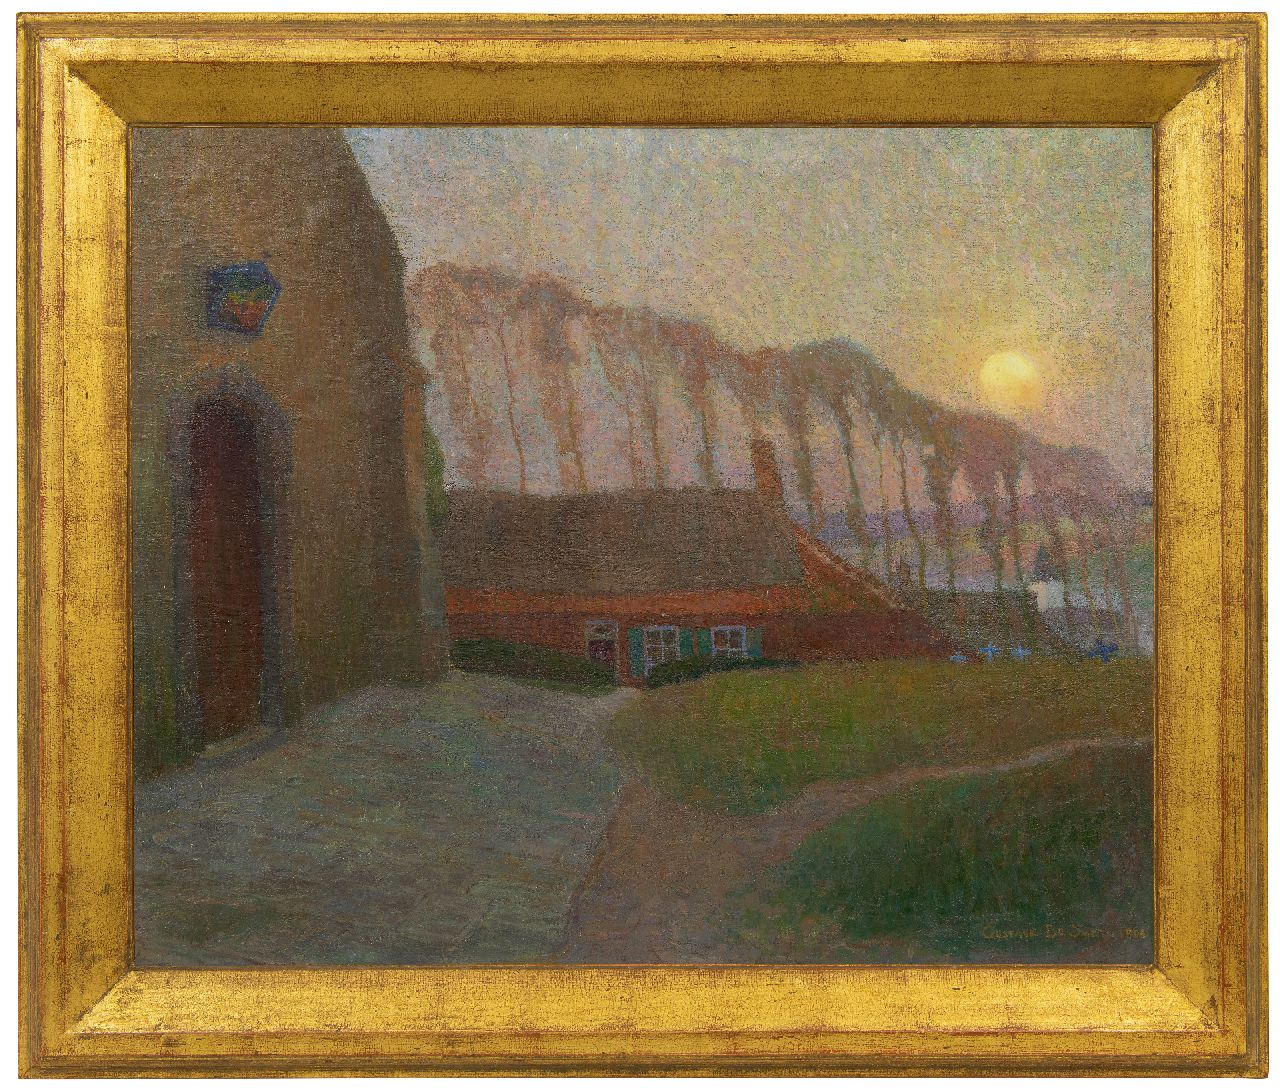 Smet G. de | Gustave de Smet | Paintings offered for sale | Landscape with a church, oil on canvas laid down on panel 69.4 x 84.4 cm, signed l.r. and dated 1904